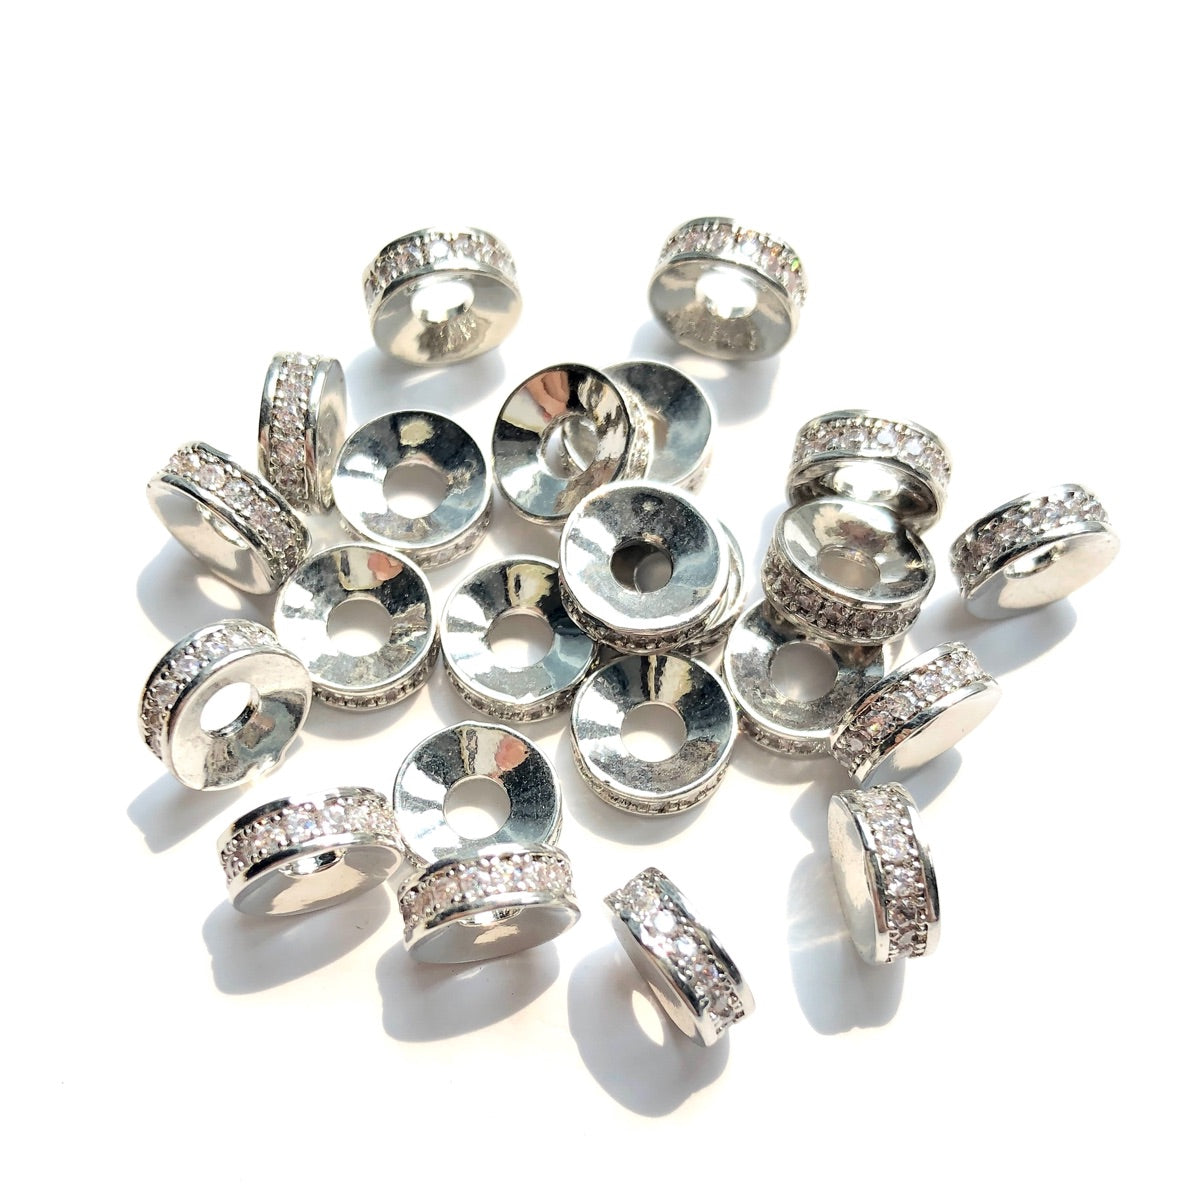 20-50pcs/lot 8*3mm CZ Paved Rondelle Wheel Spacers Silver CZ Paved Spacers Big Hole Beads New Spacers Arrivals Rondelle Beads Wholesale Charms Beads Beyond